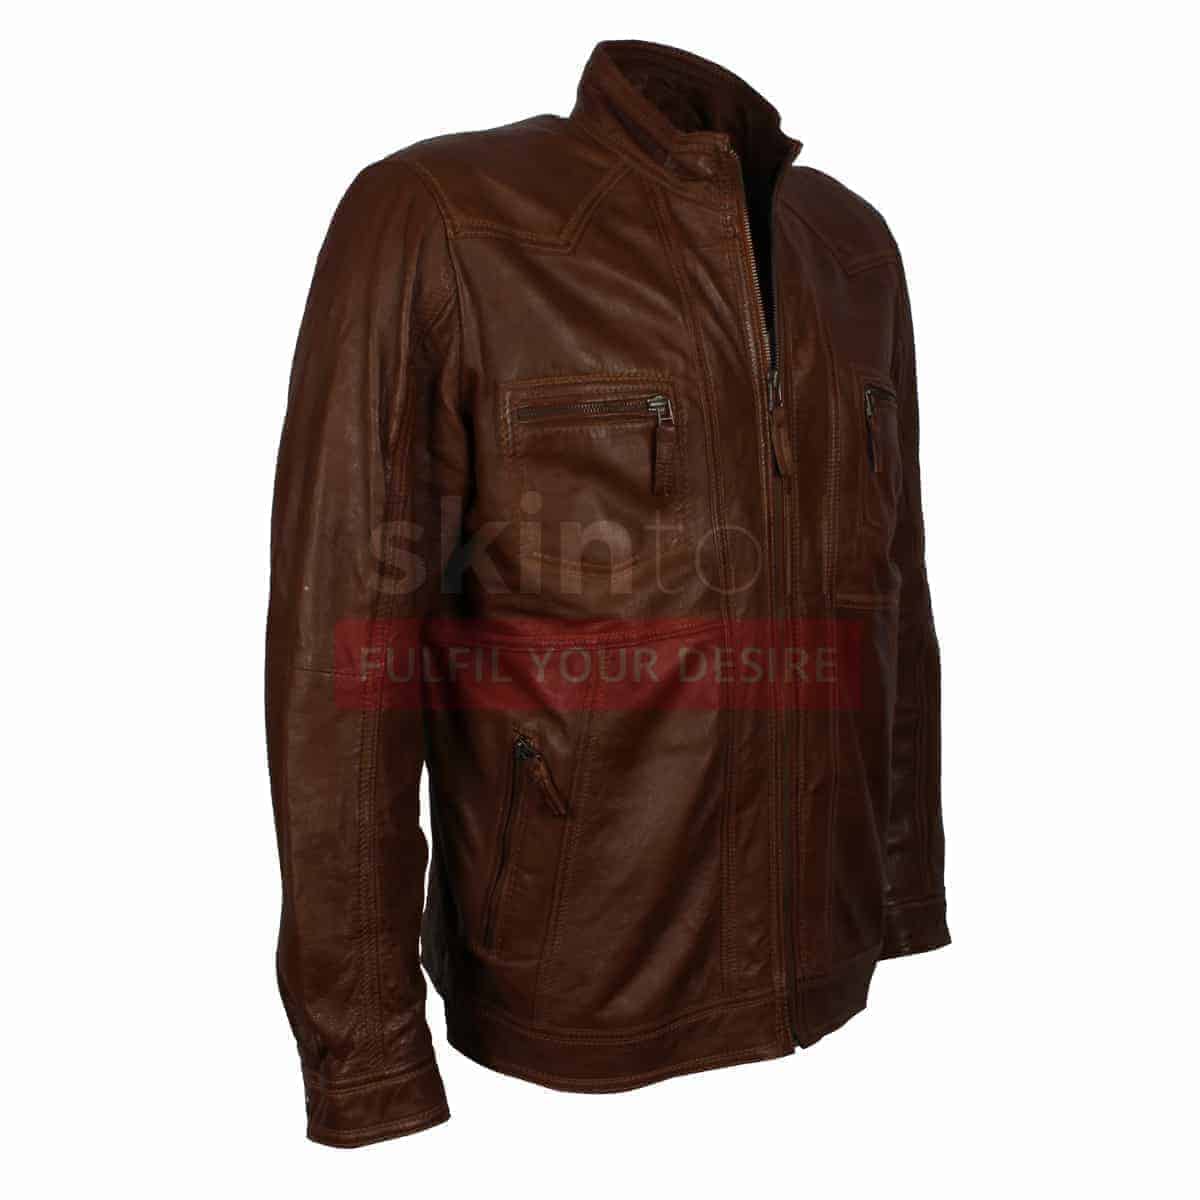 New Luxury Men's Brown Classic City Jacket Shirt Casual Style Real Nappa Leather 